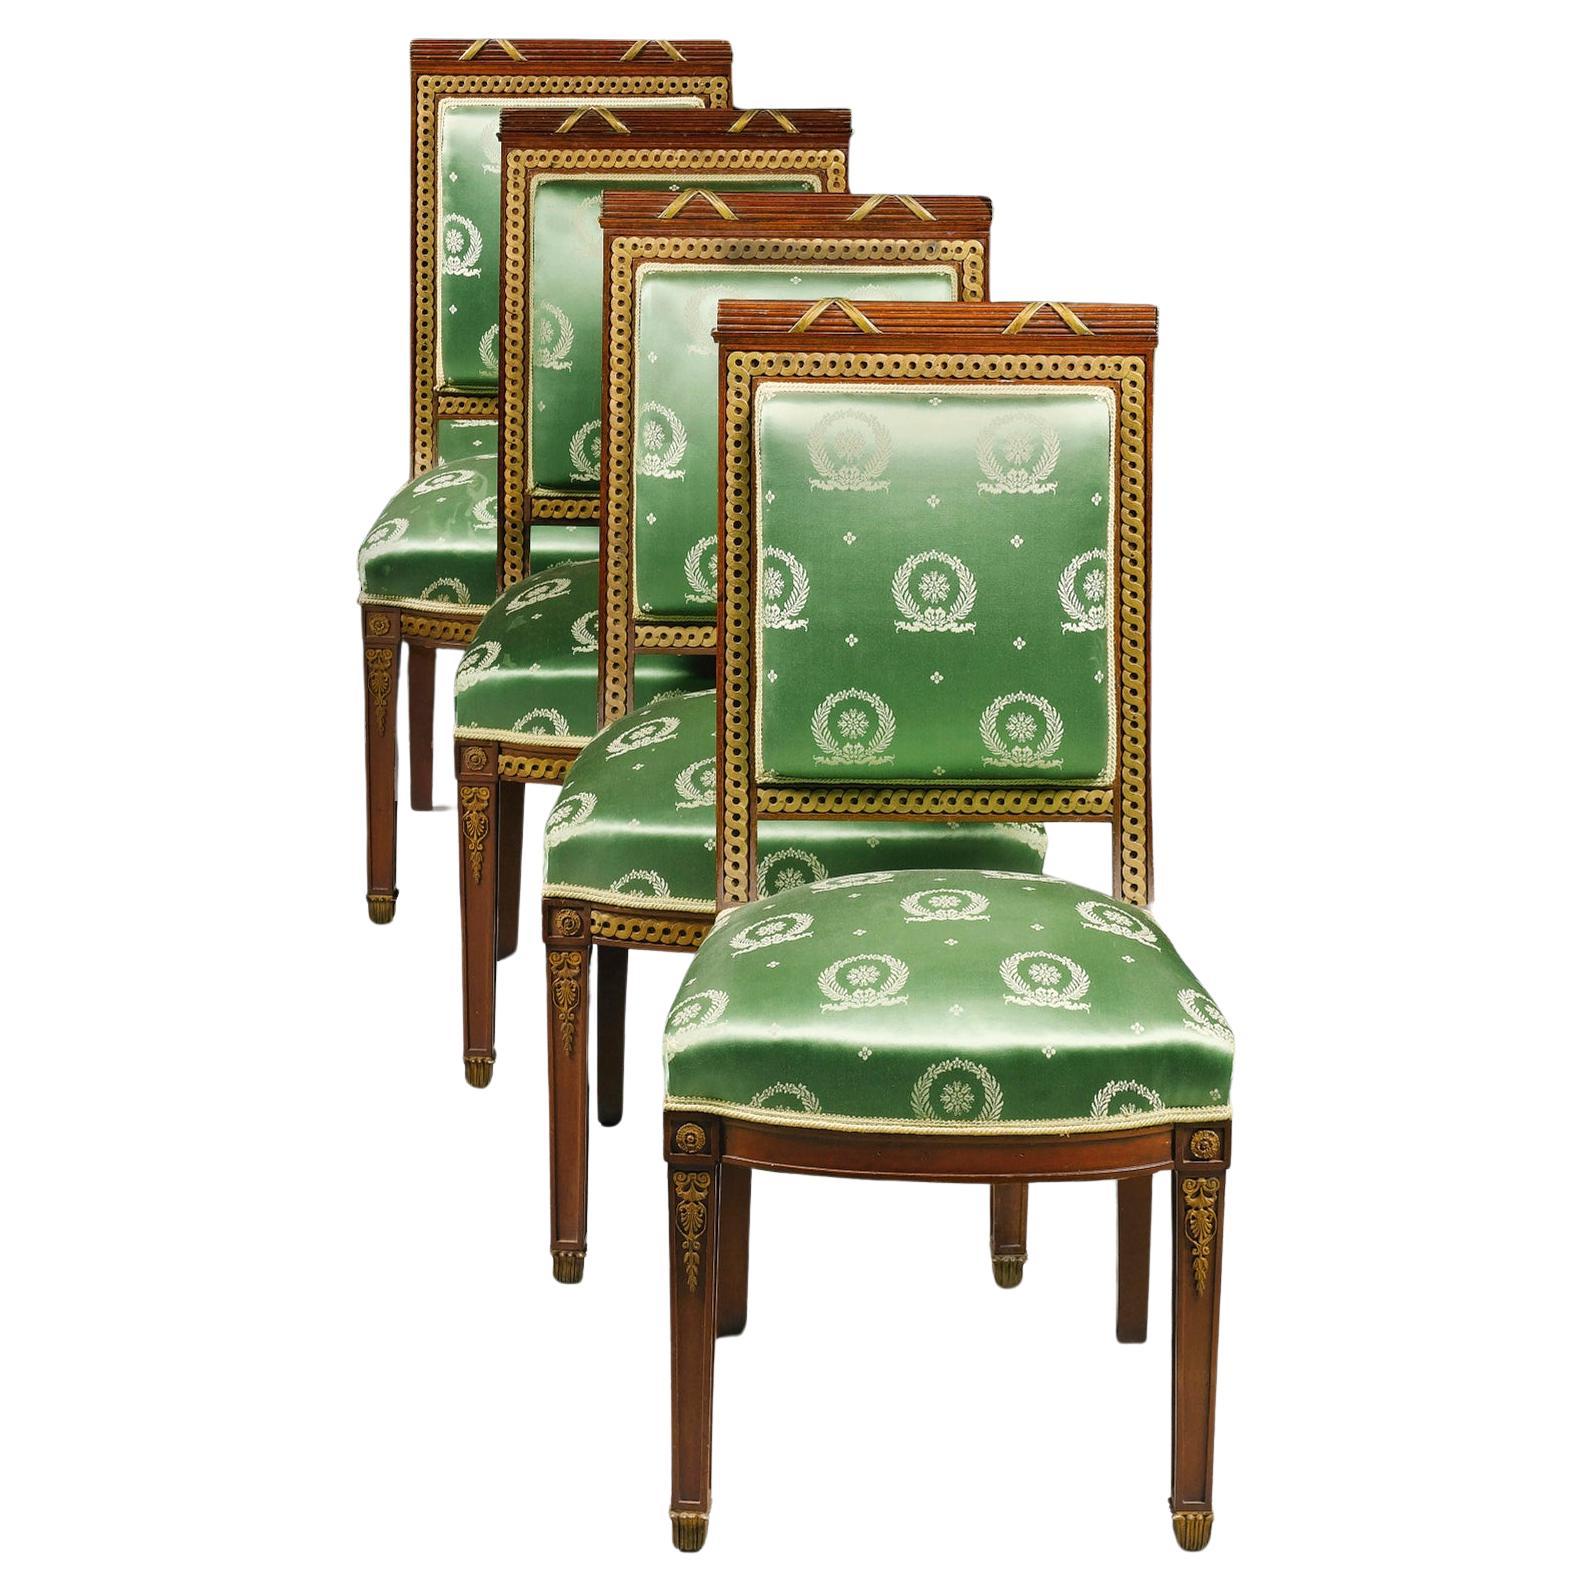 A Set of Four Mahogany And Gilt-Bronze Second Empire Style Salon Chairs in the M For Sale